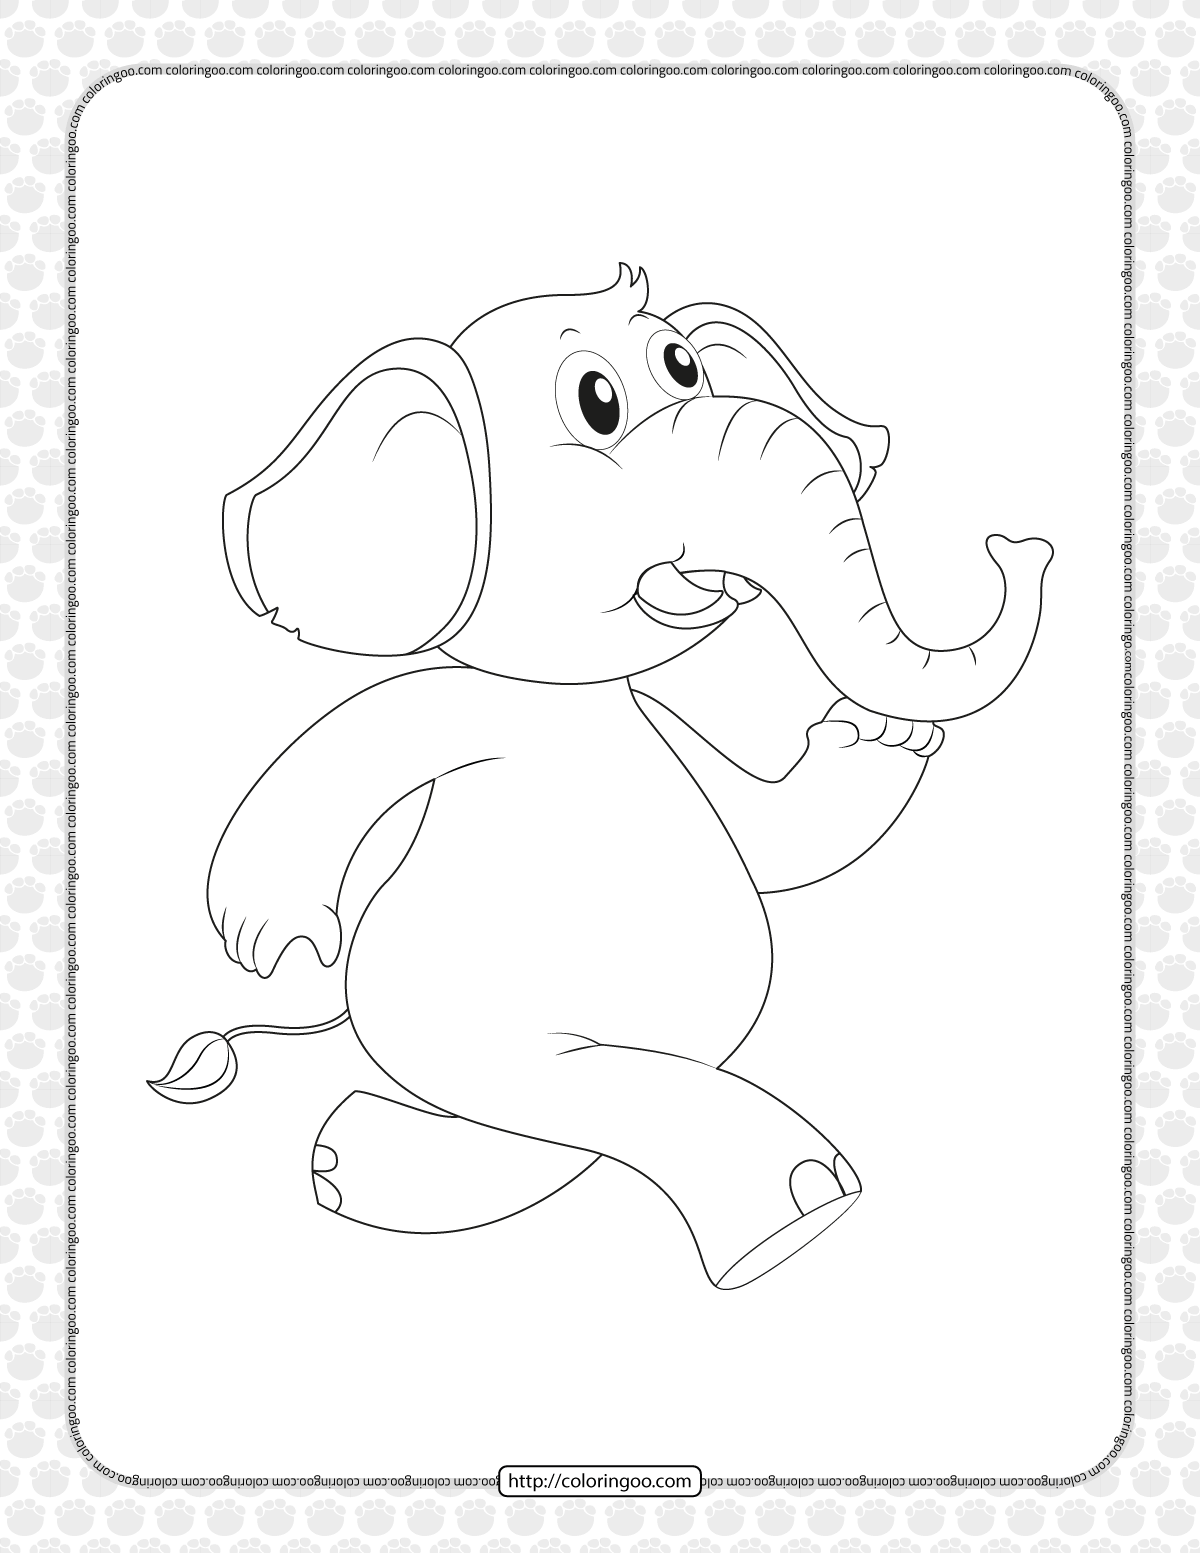 doodle animal for elephant coloring page